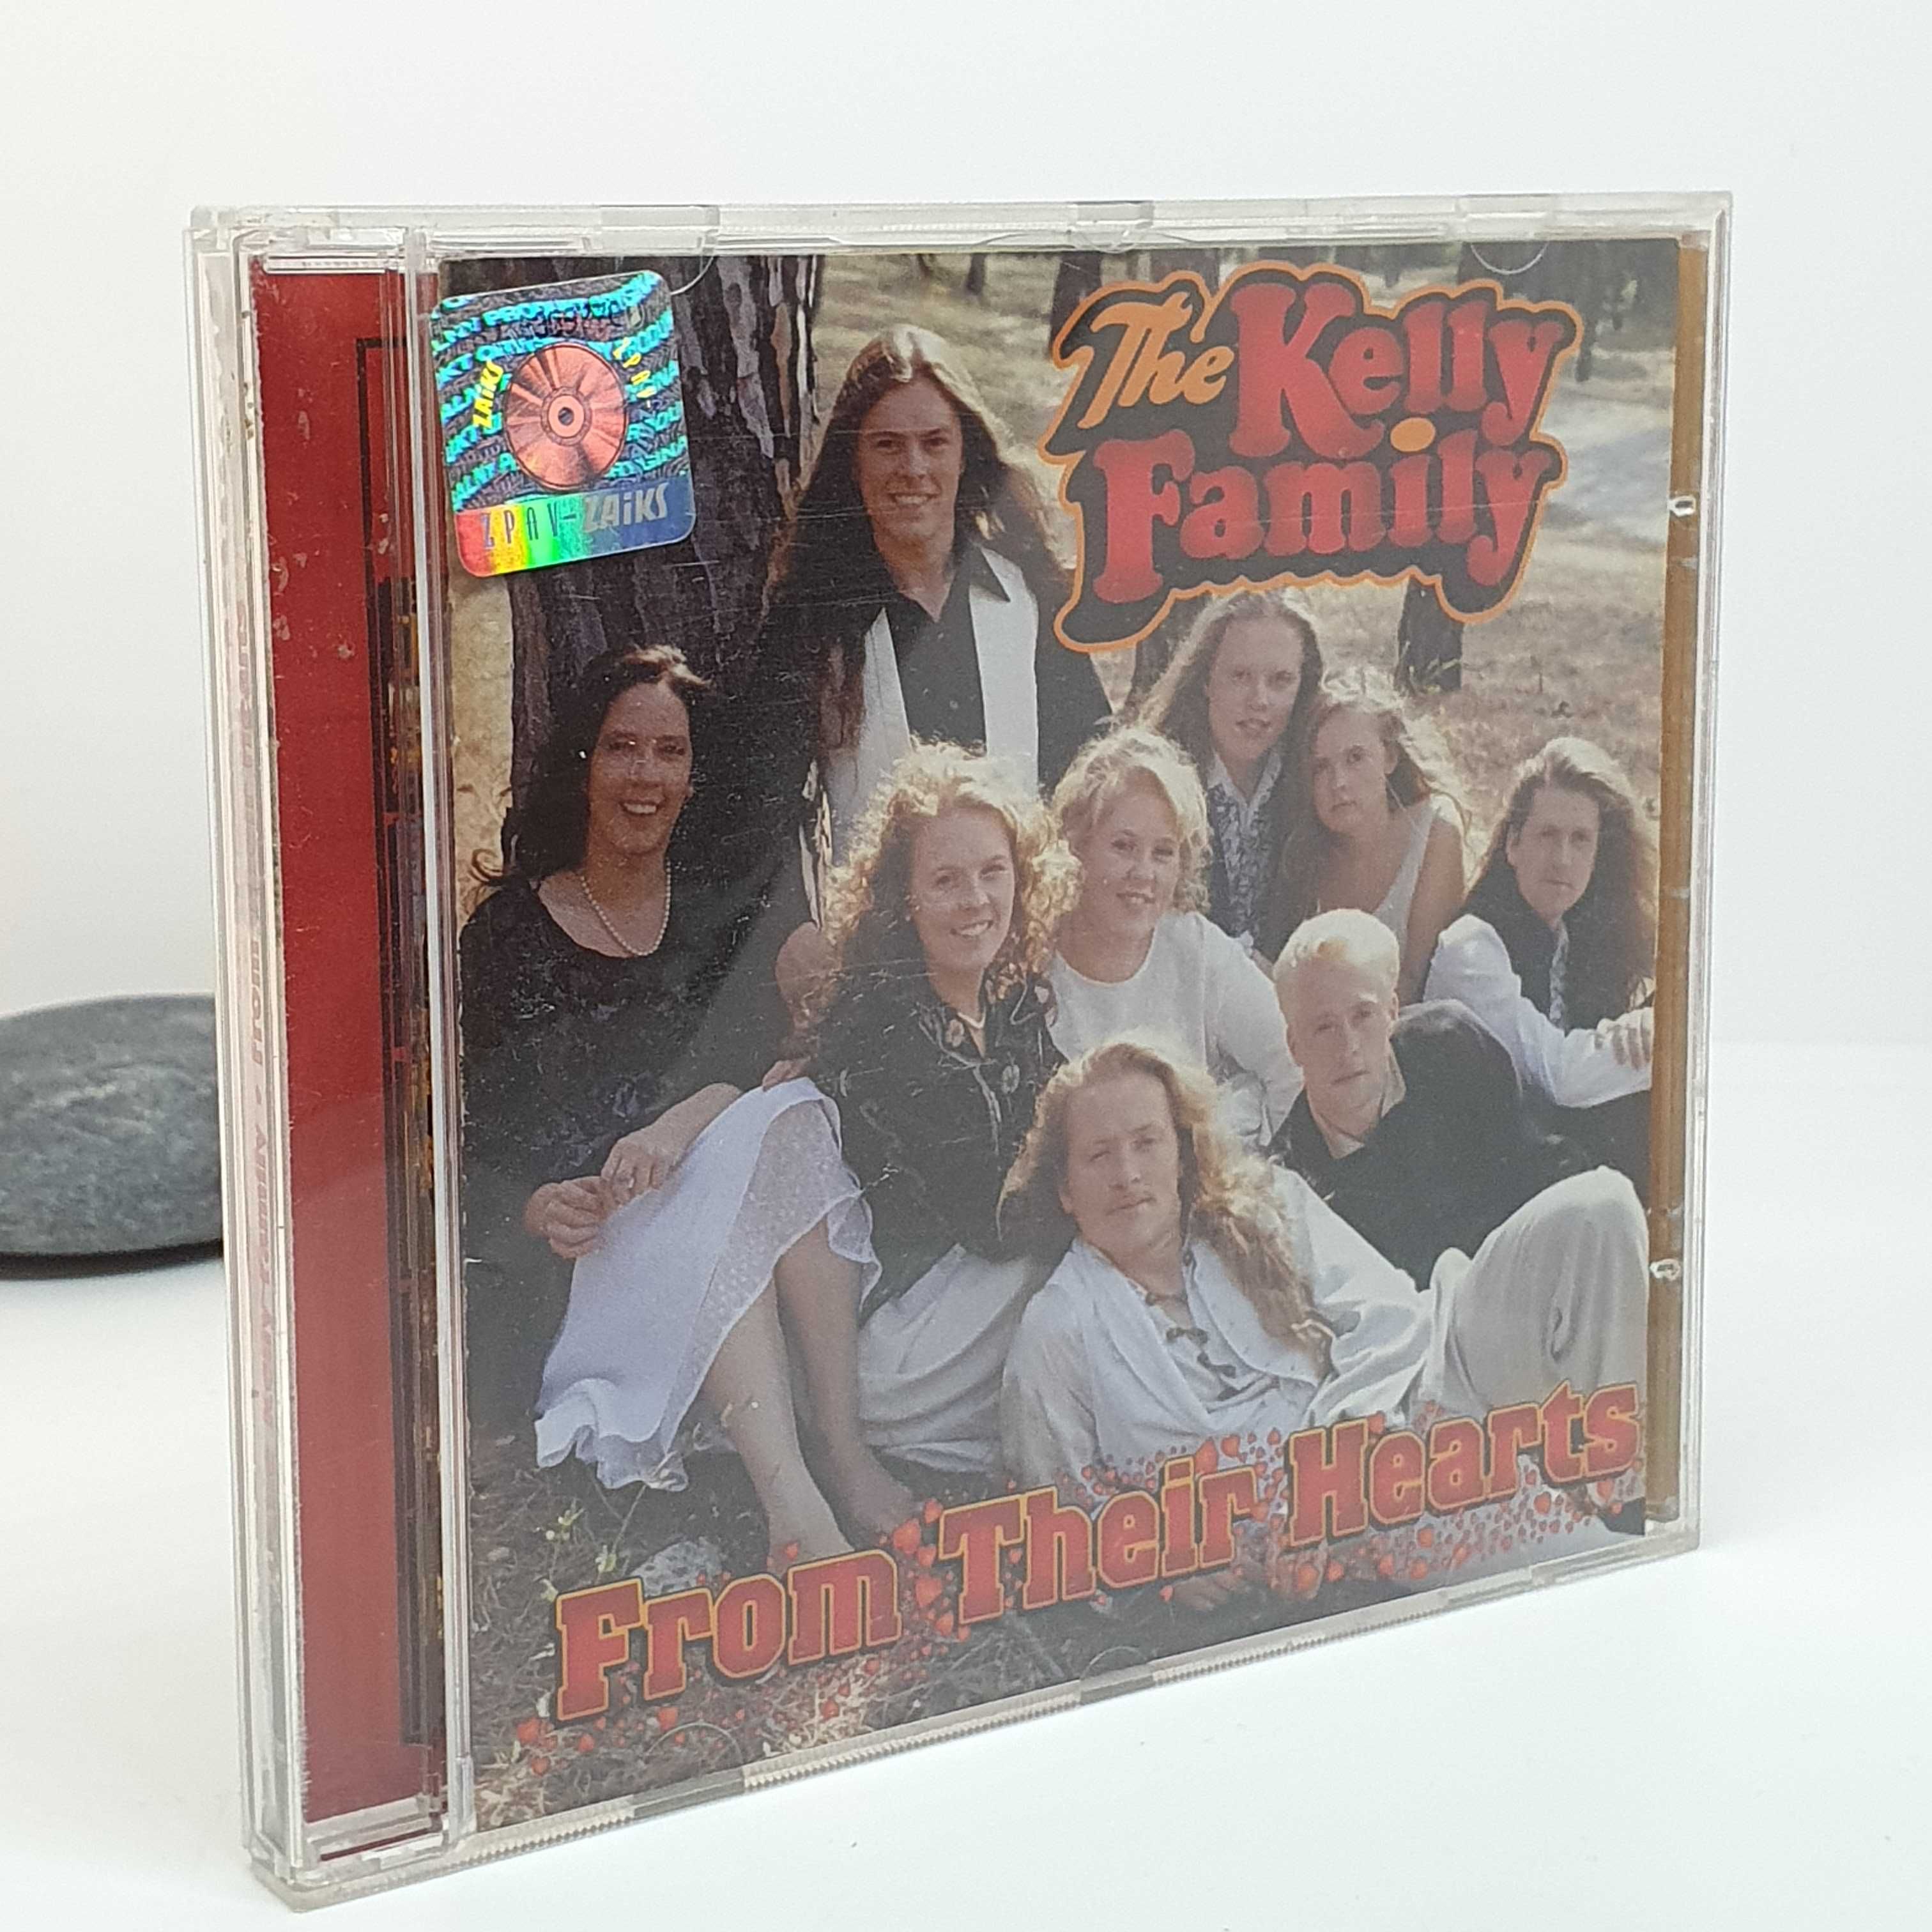 The Kelly Family - "From Their Hearts" (CD)